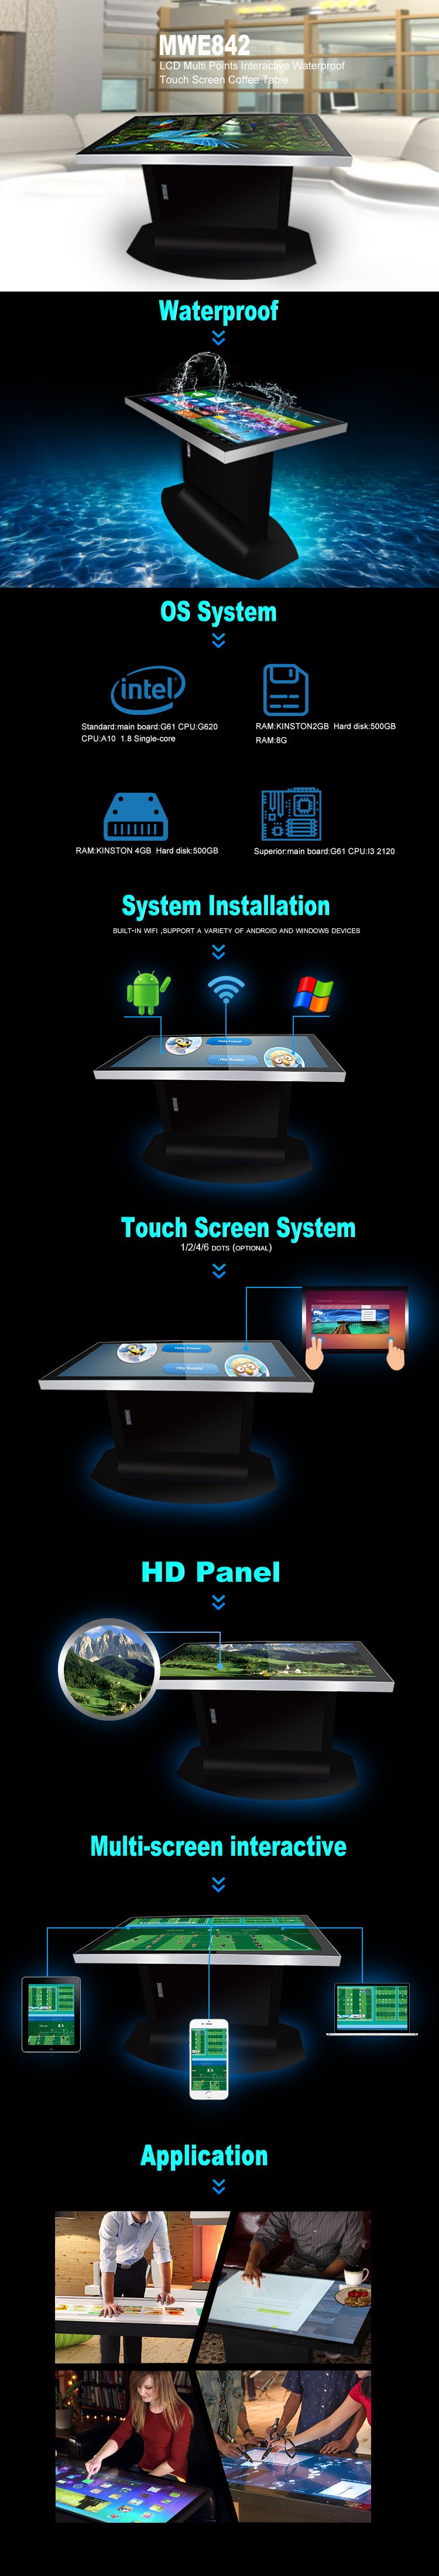 Model Number: MWE842 LCD Multi Points Interactive Waterproof Touch Screen Coffee Table